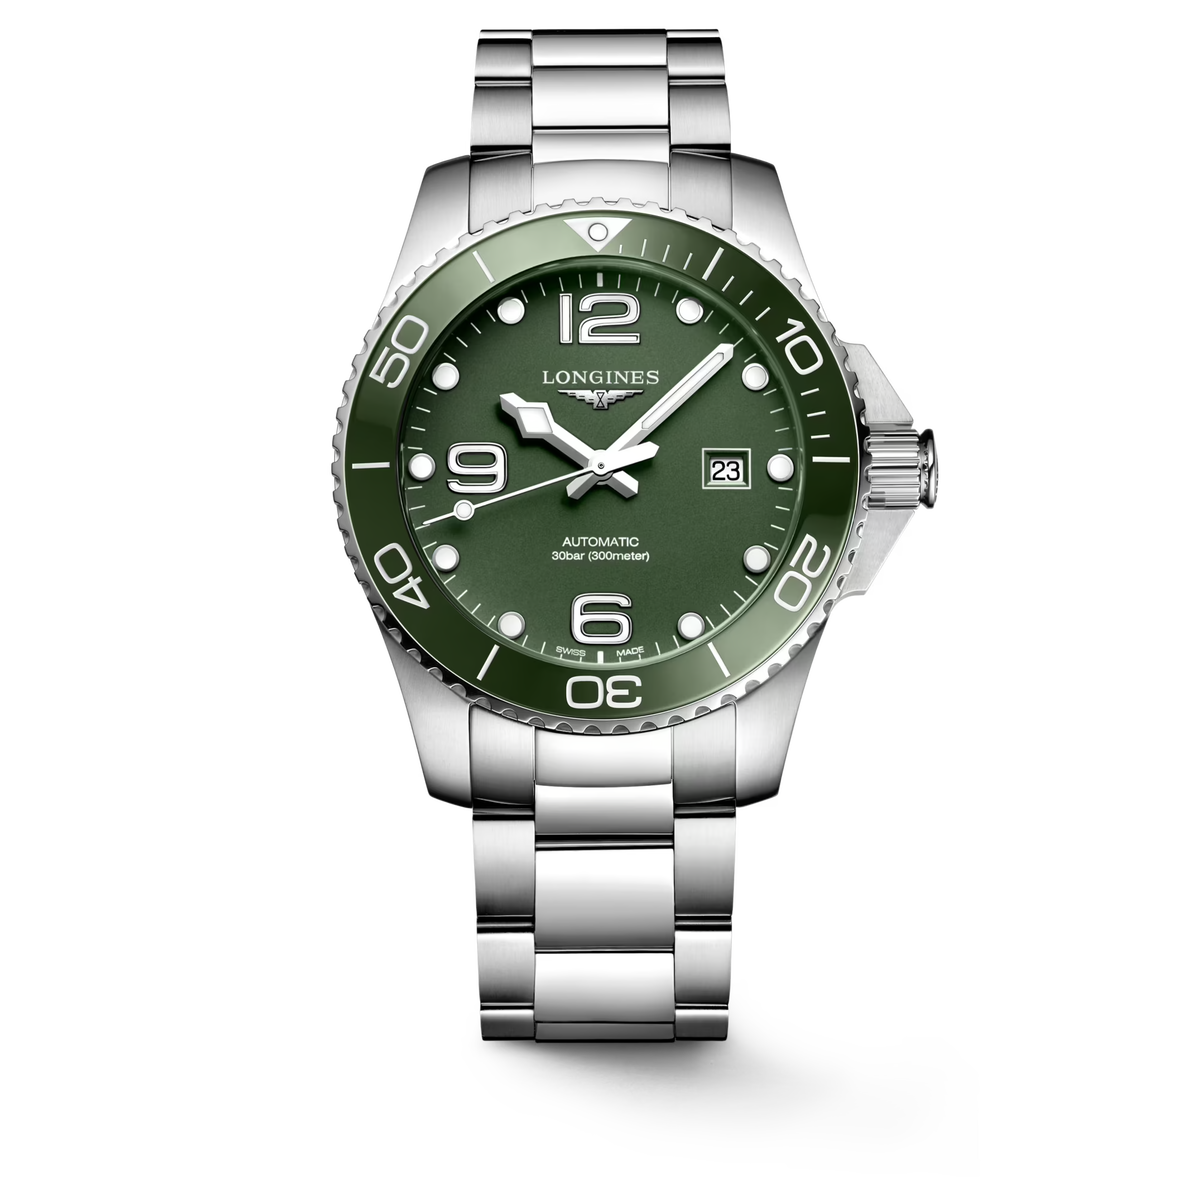 LONGINES HYDROCONQUEST CERAMIC GREEN DIAL 43MM AUTOMATIC DIVING WATCH L37824066